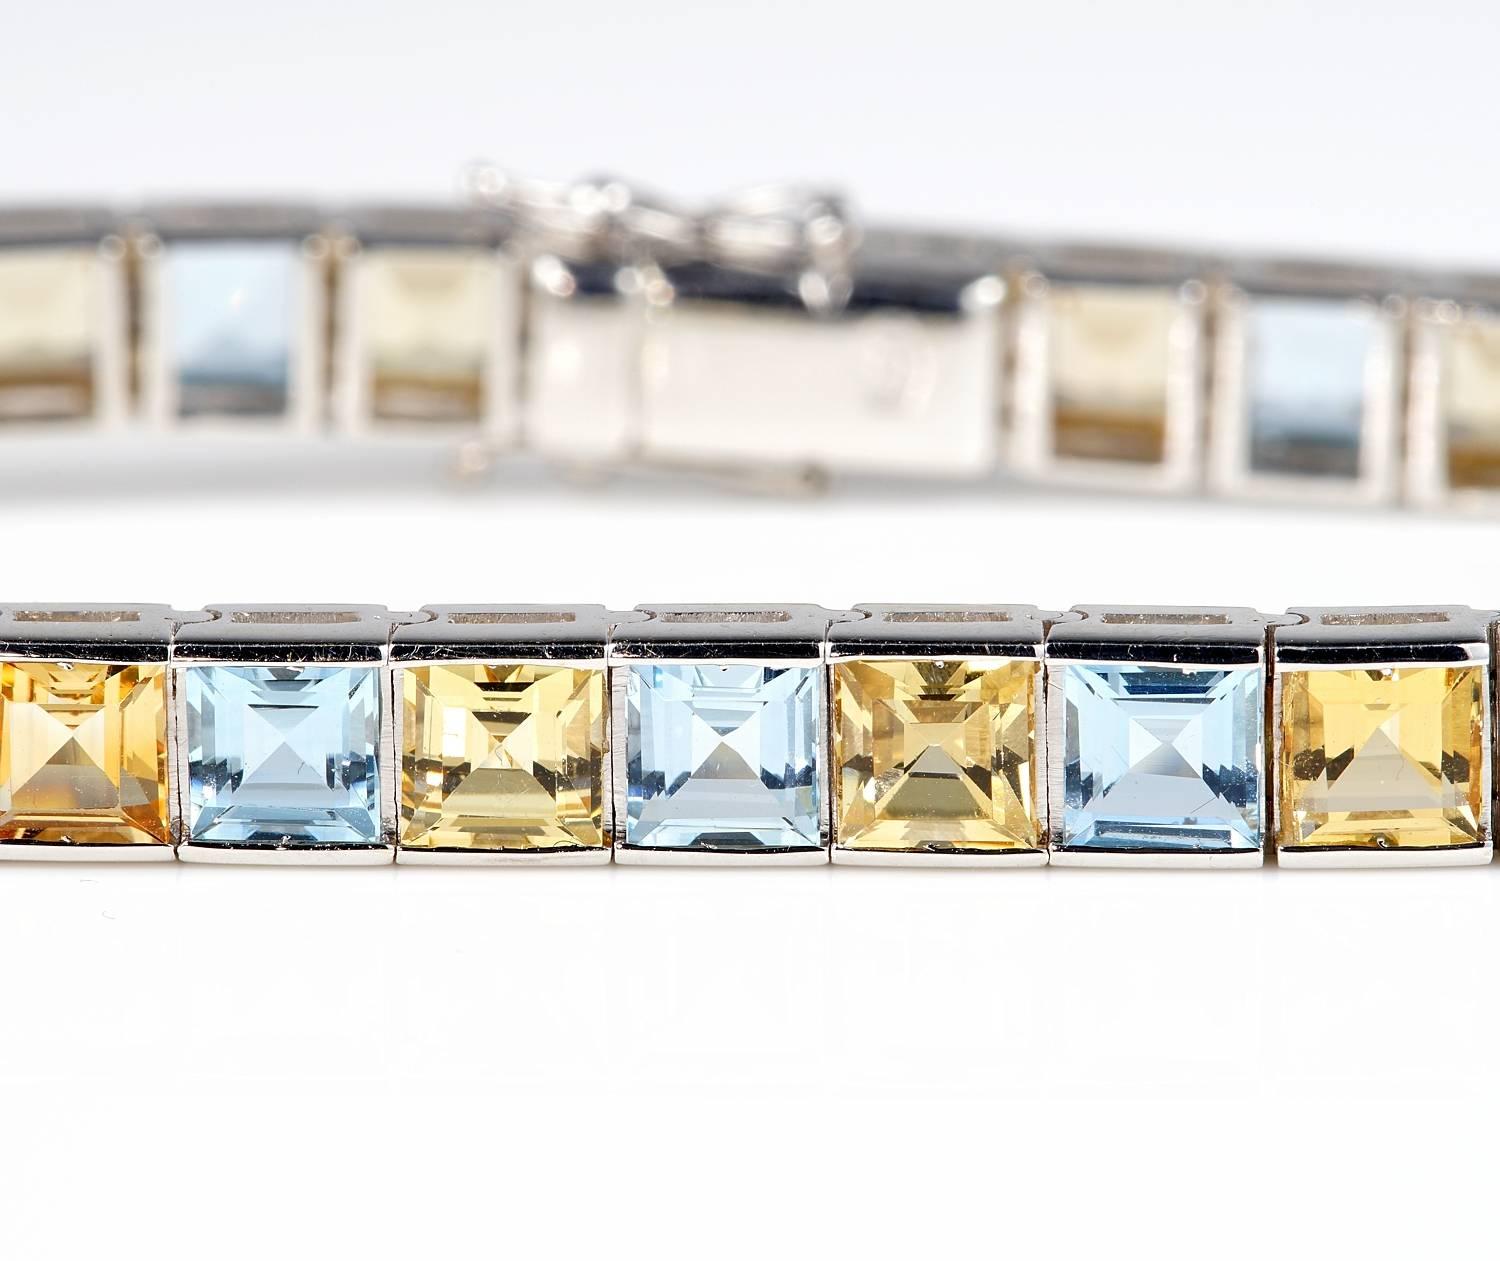 Everlasting!
This spectacular quality of Aquamarine and Imperial Topaz tennis bracelet is the perfect complement for every occasion
Ravishing, pastel colours of Natural Aquamarine and Imperial Topaz of elegant square cuts sparkle and radiates fire